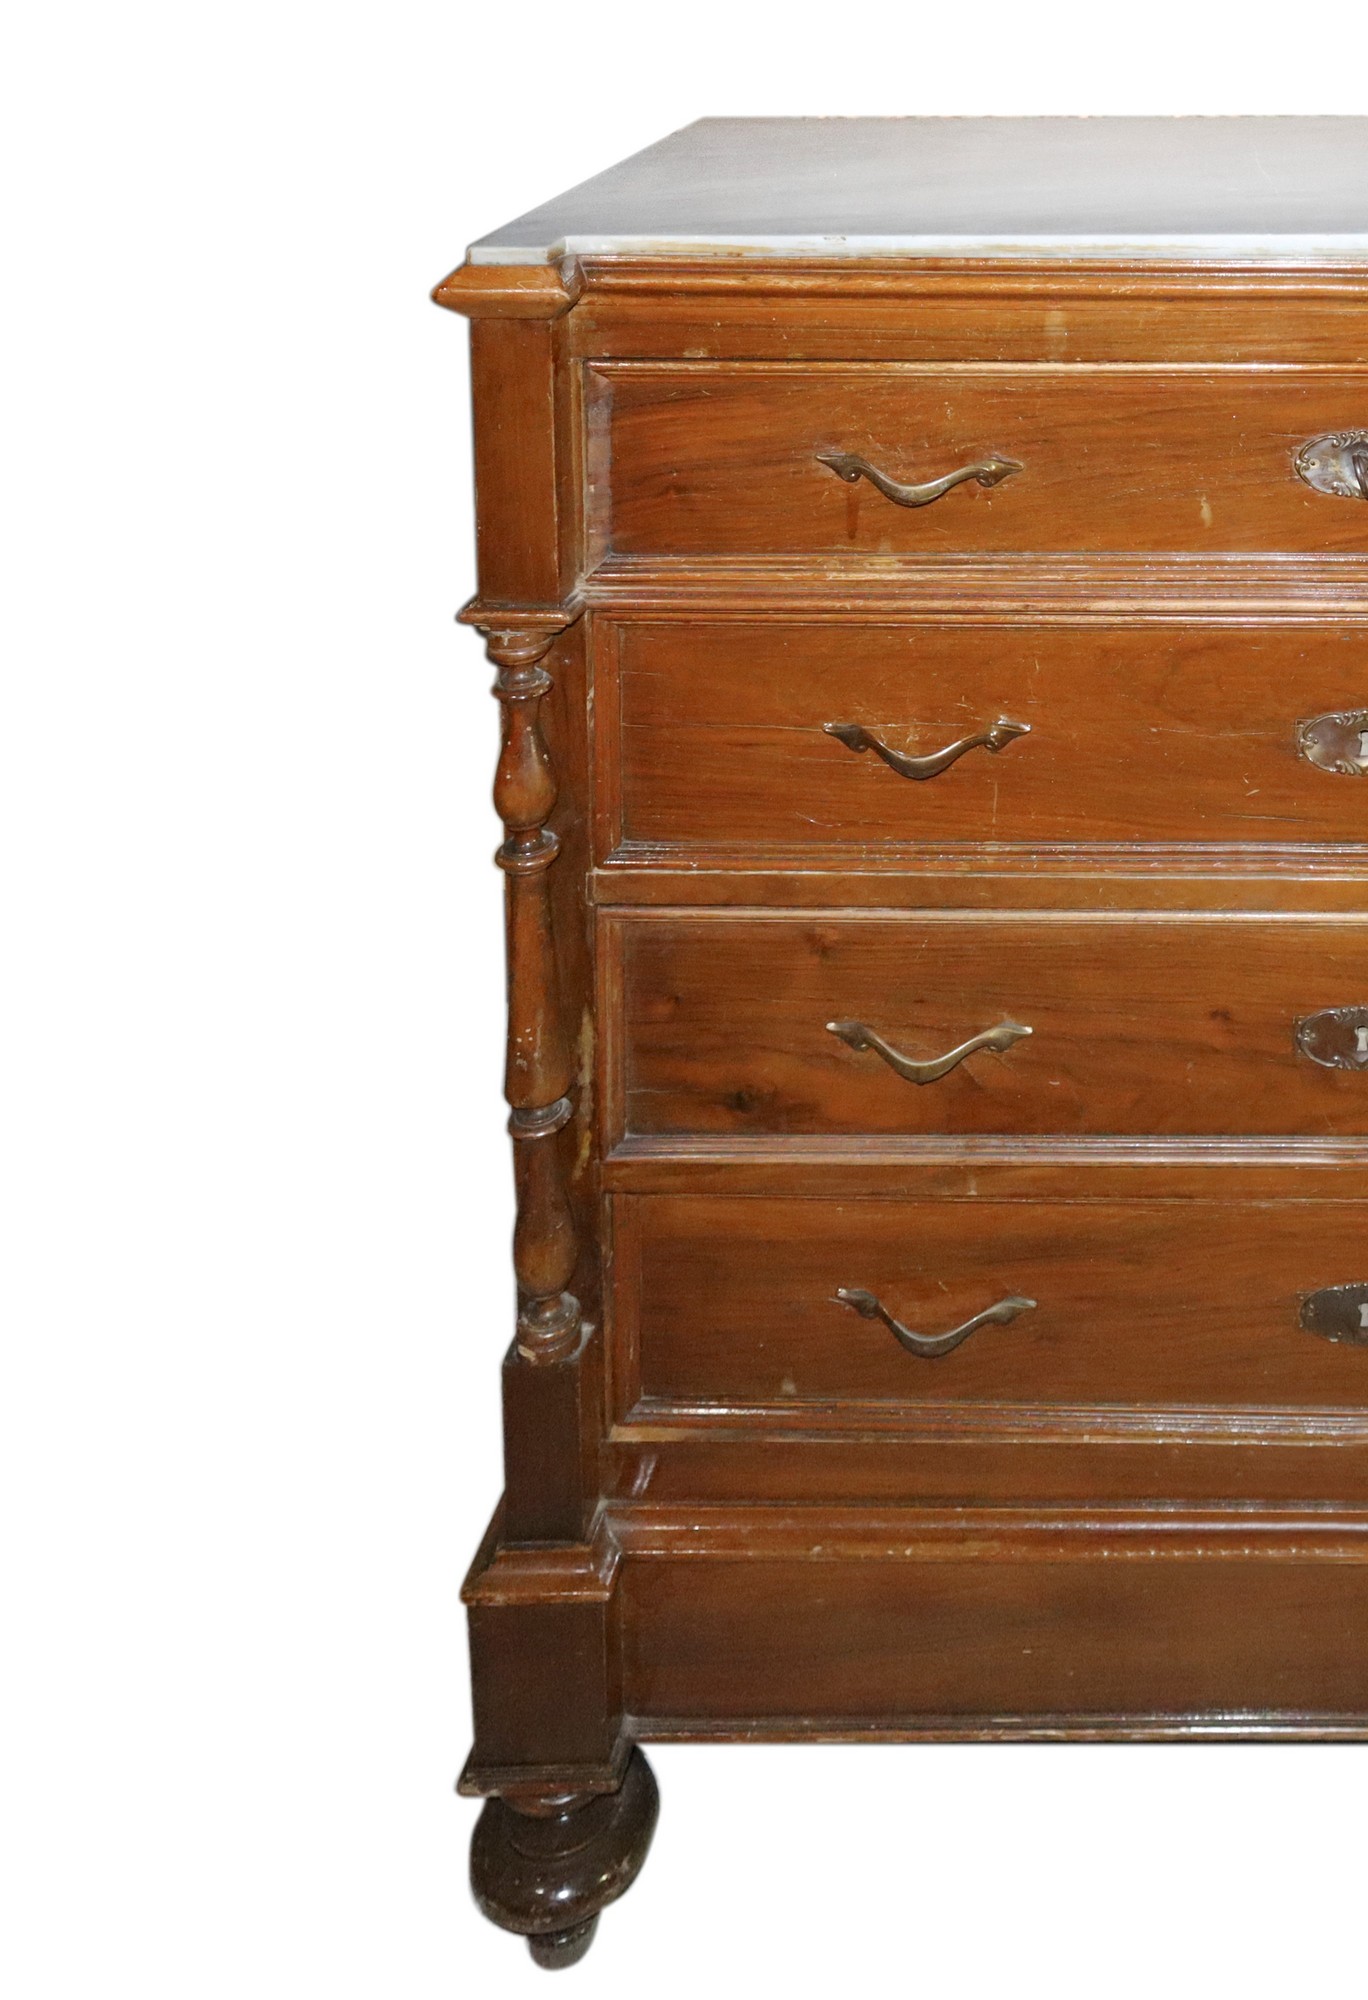 Chest of drawers in mahogany wood, Sicily, late 19th century - Image 3 of 4